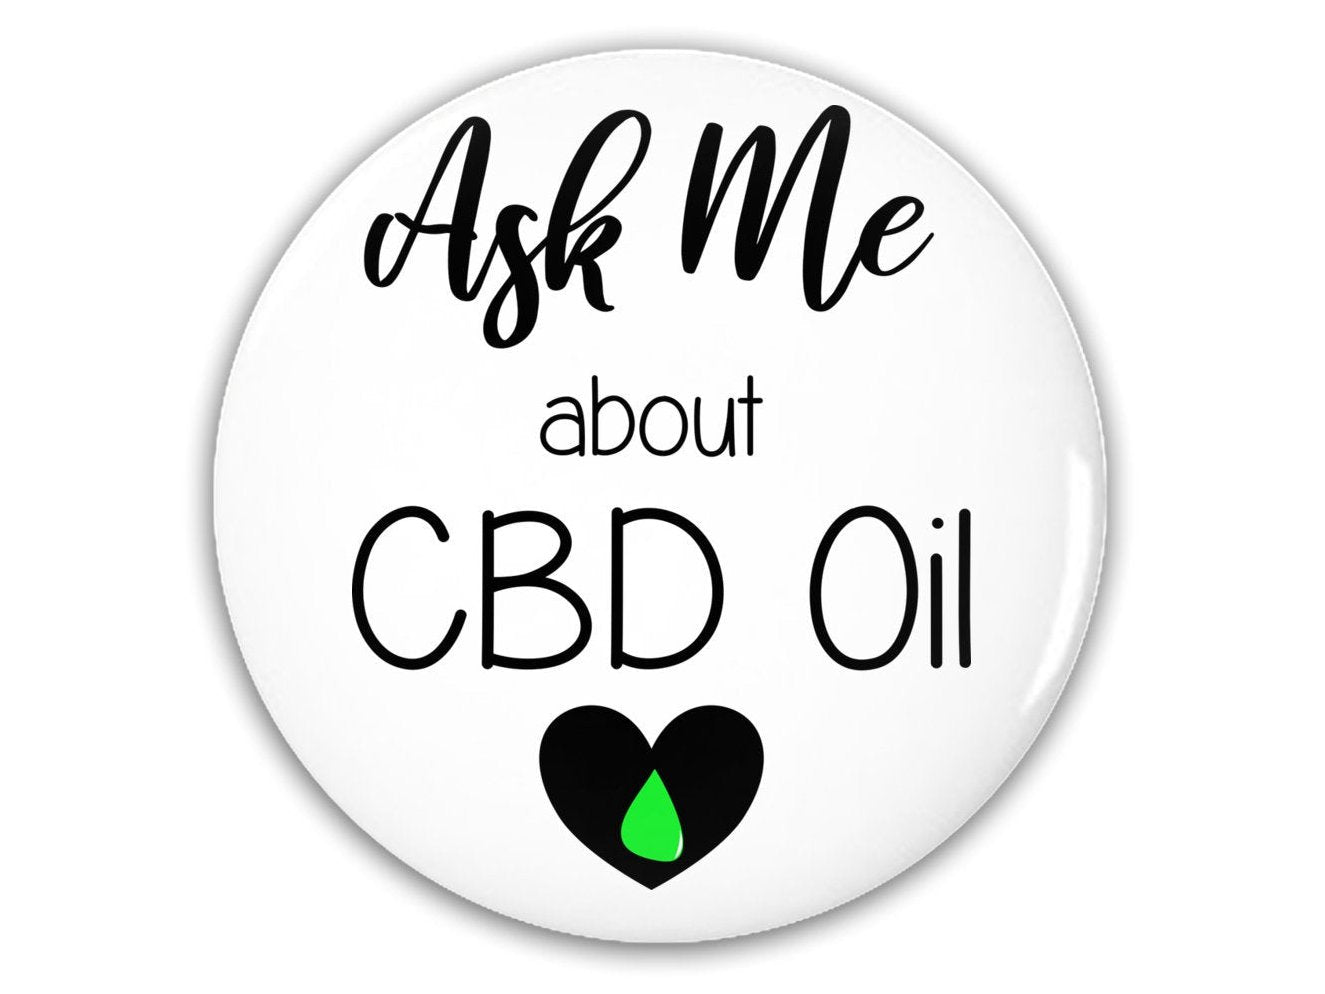 Ask Me About CBD Oil Pin Back Button - CBD Oil Business Marketing And Promotion Gift